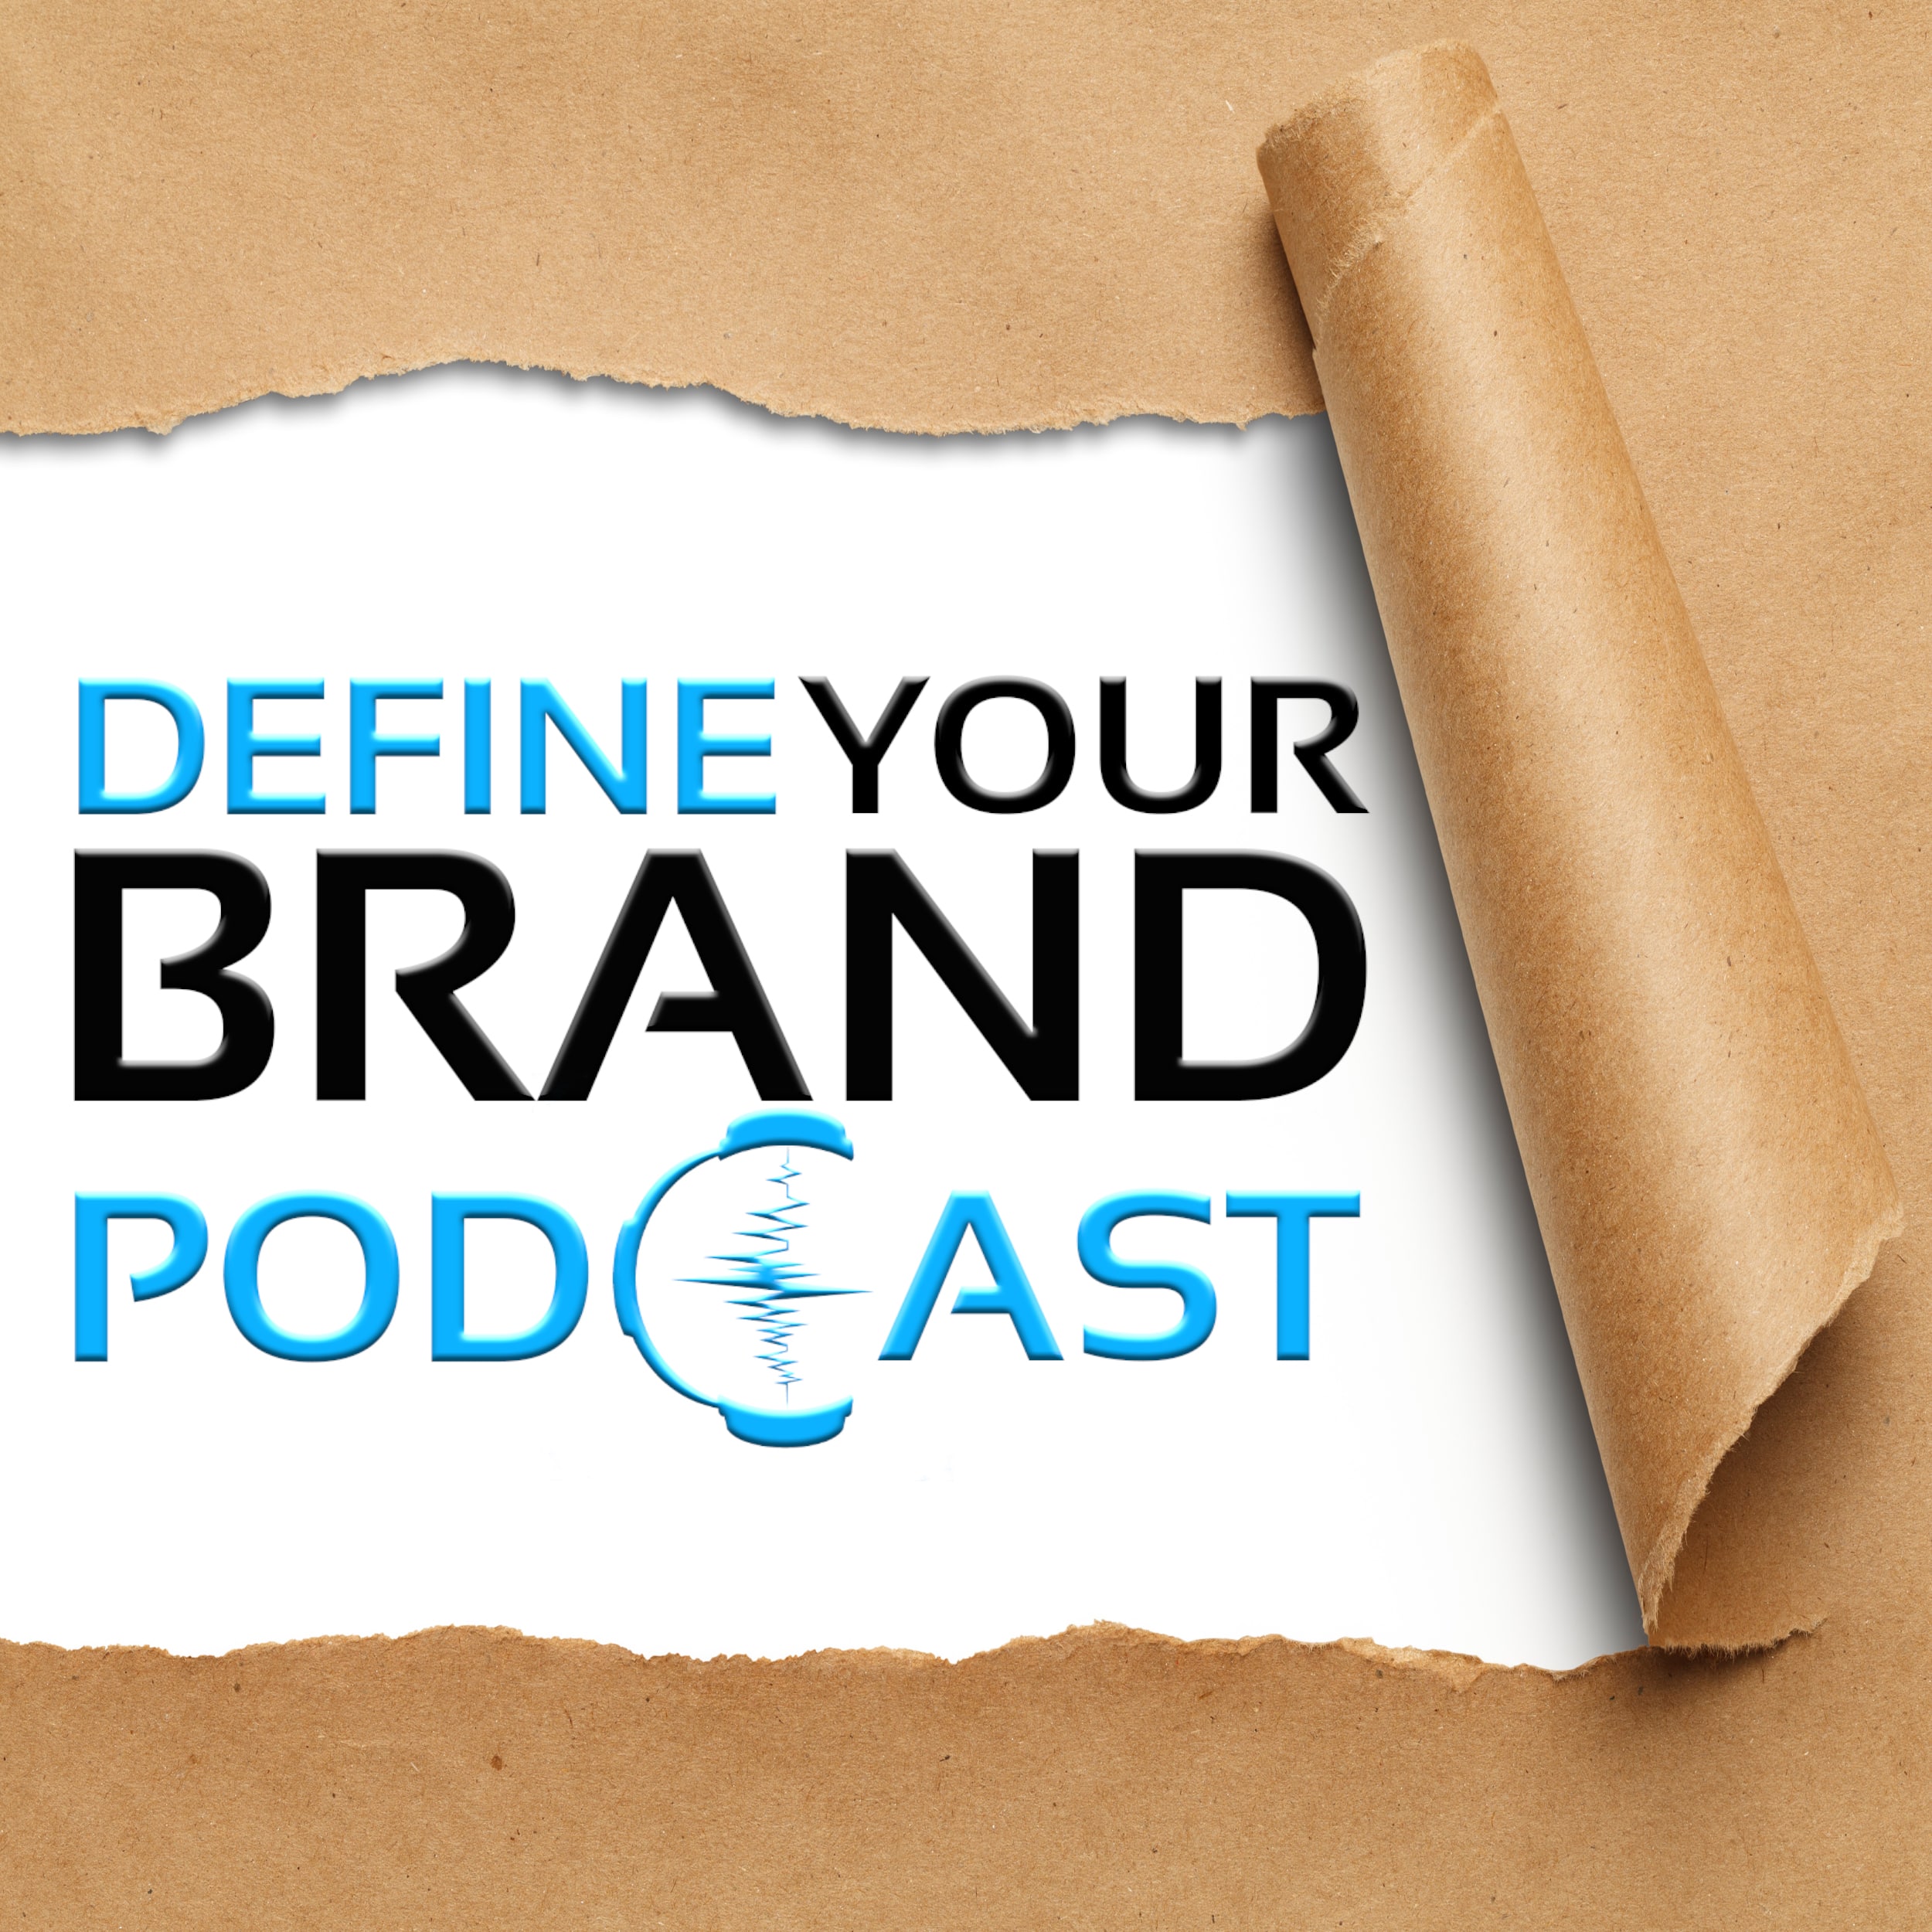 #4:  Russell Brunson - The Way Brands are Generating Sales Online